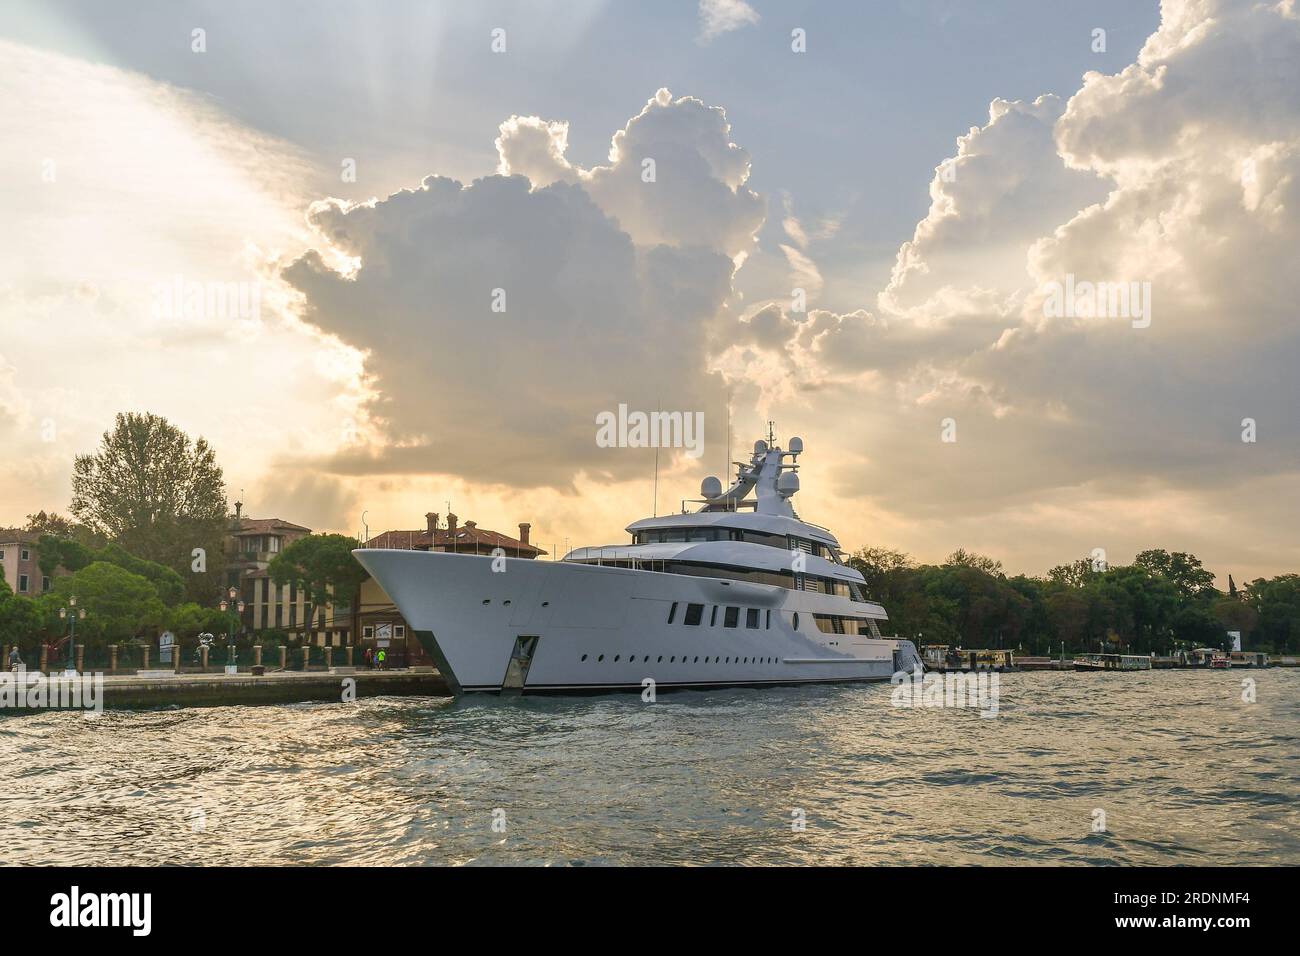 The superyacht Bliss (Feadship, 94,75 m, 2021) docked at Riva degli Schiavoni waterfront during the Venice Biennale 2022, Venice, Italy Stock Photo